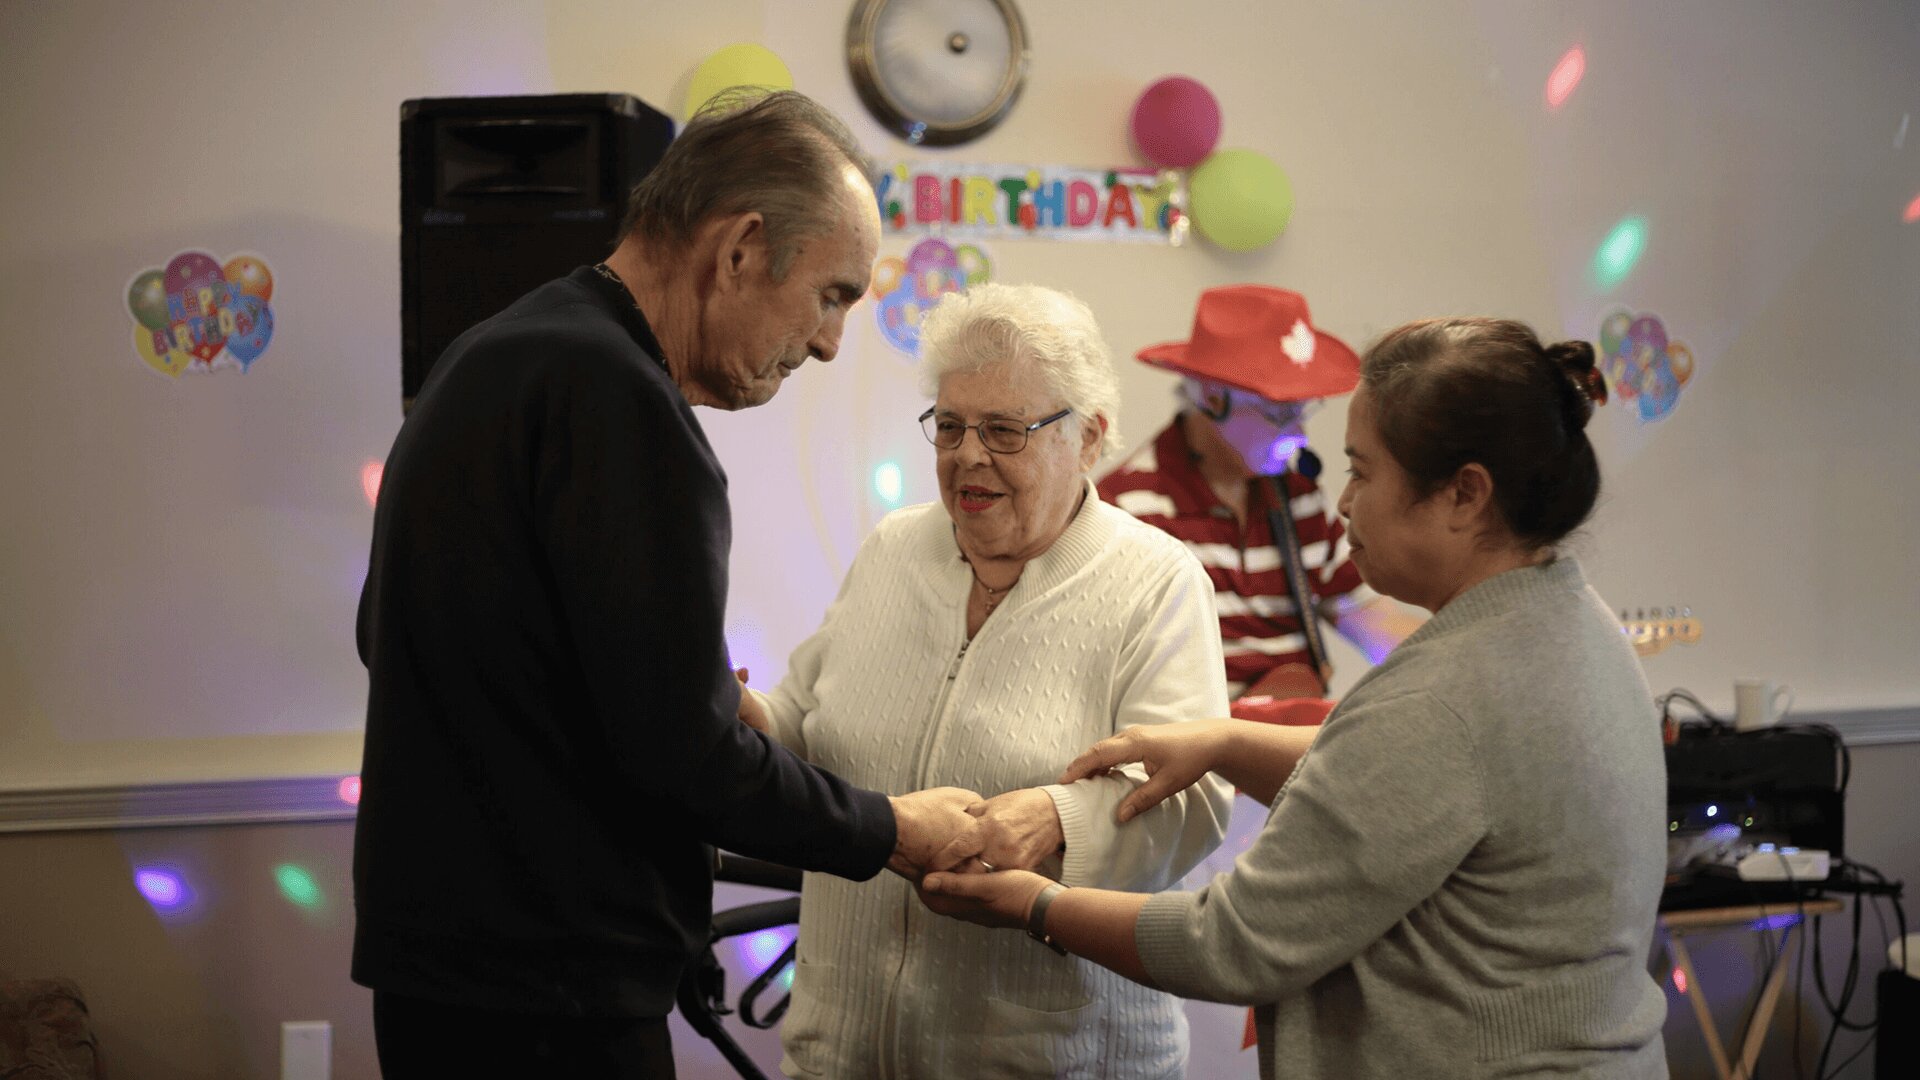 An elderly couple dance together at community event at RCG